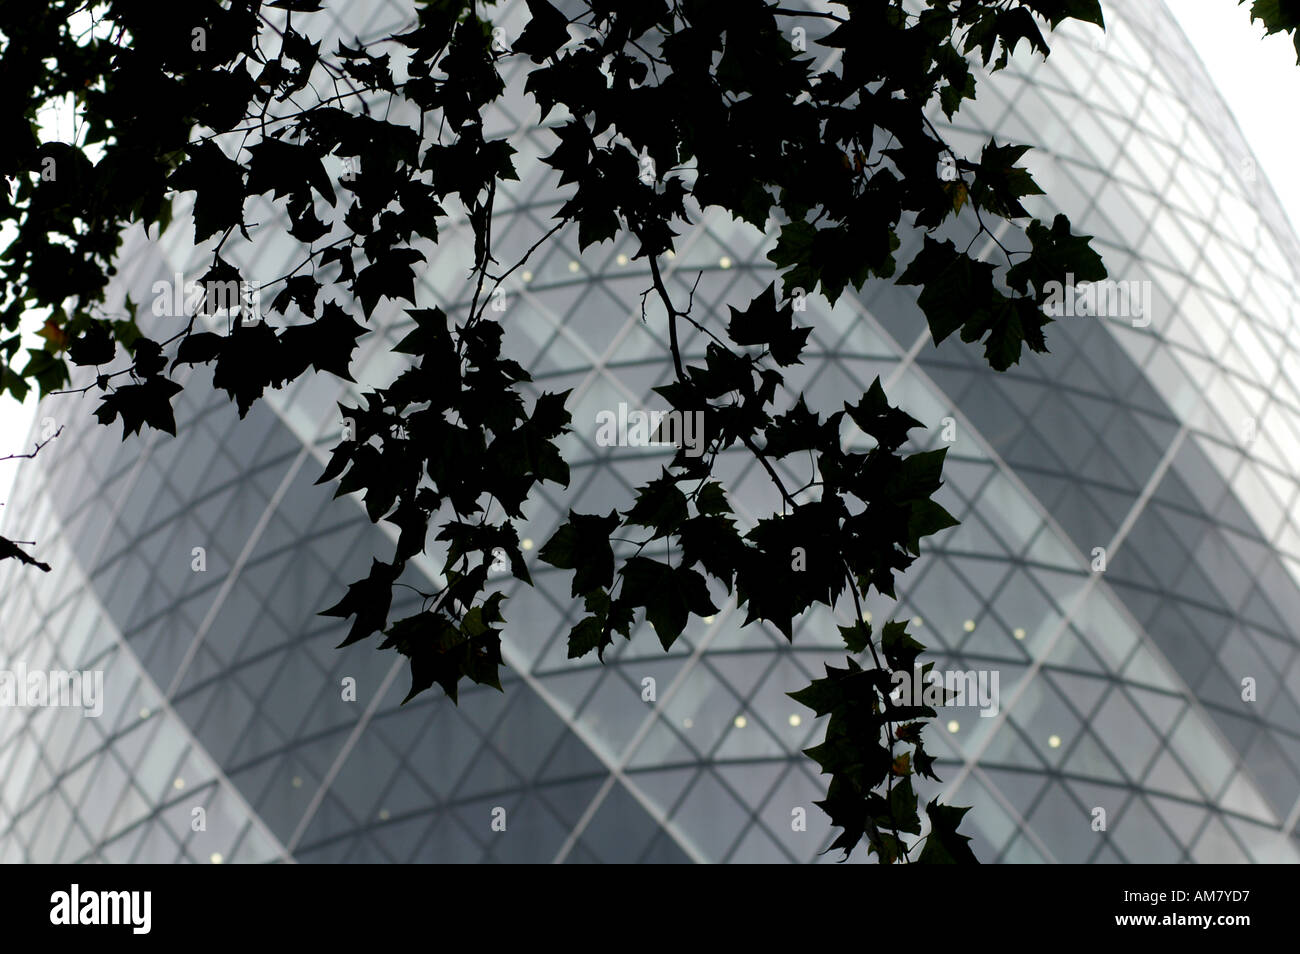 CITY OF LONDON AUTUMN AND THE SWISS RE BUILDING  2005 Stock Photo